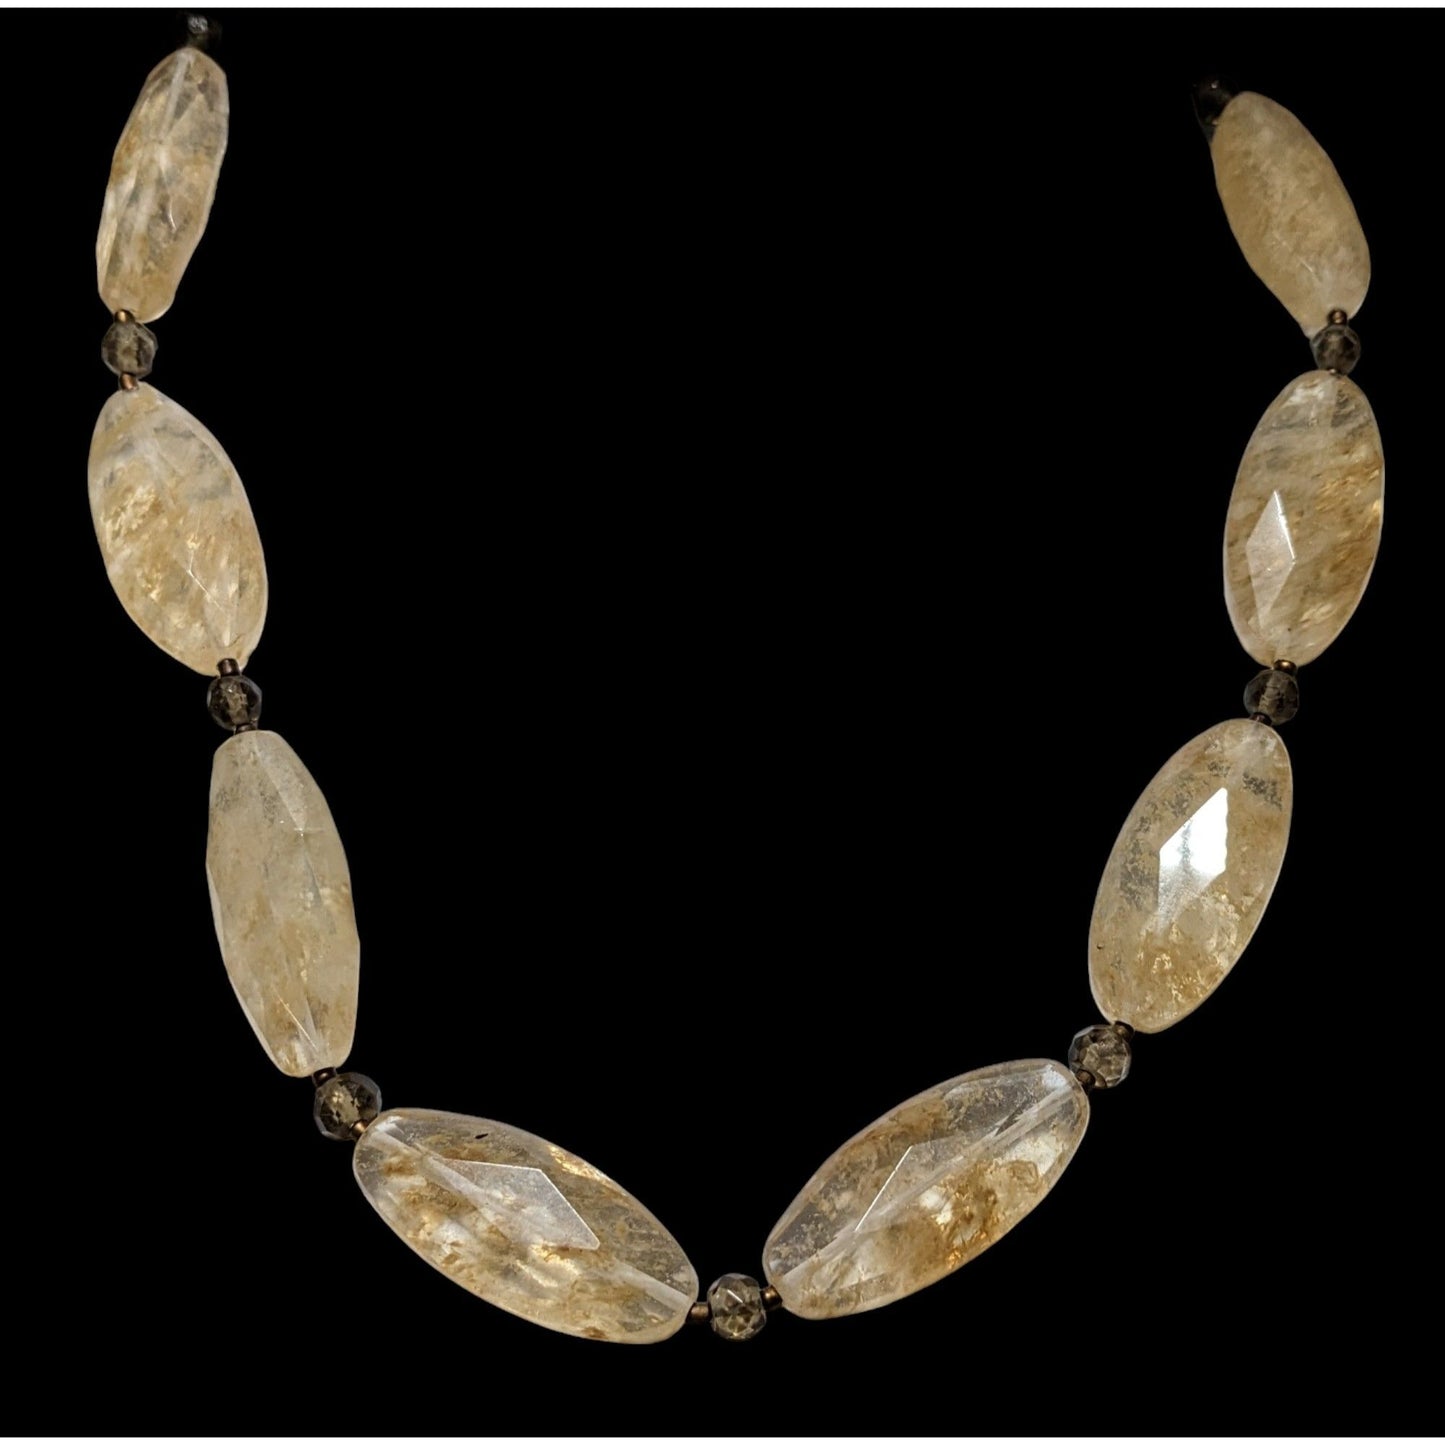 J.Jill Faceted Clear And Tan Agate Necklace